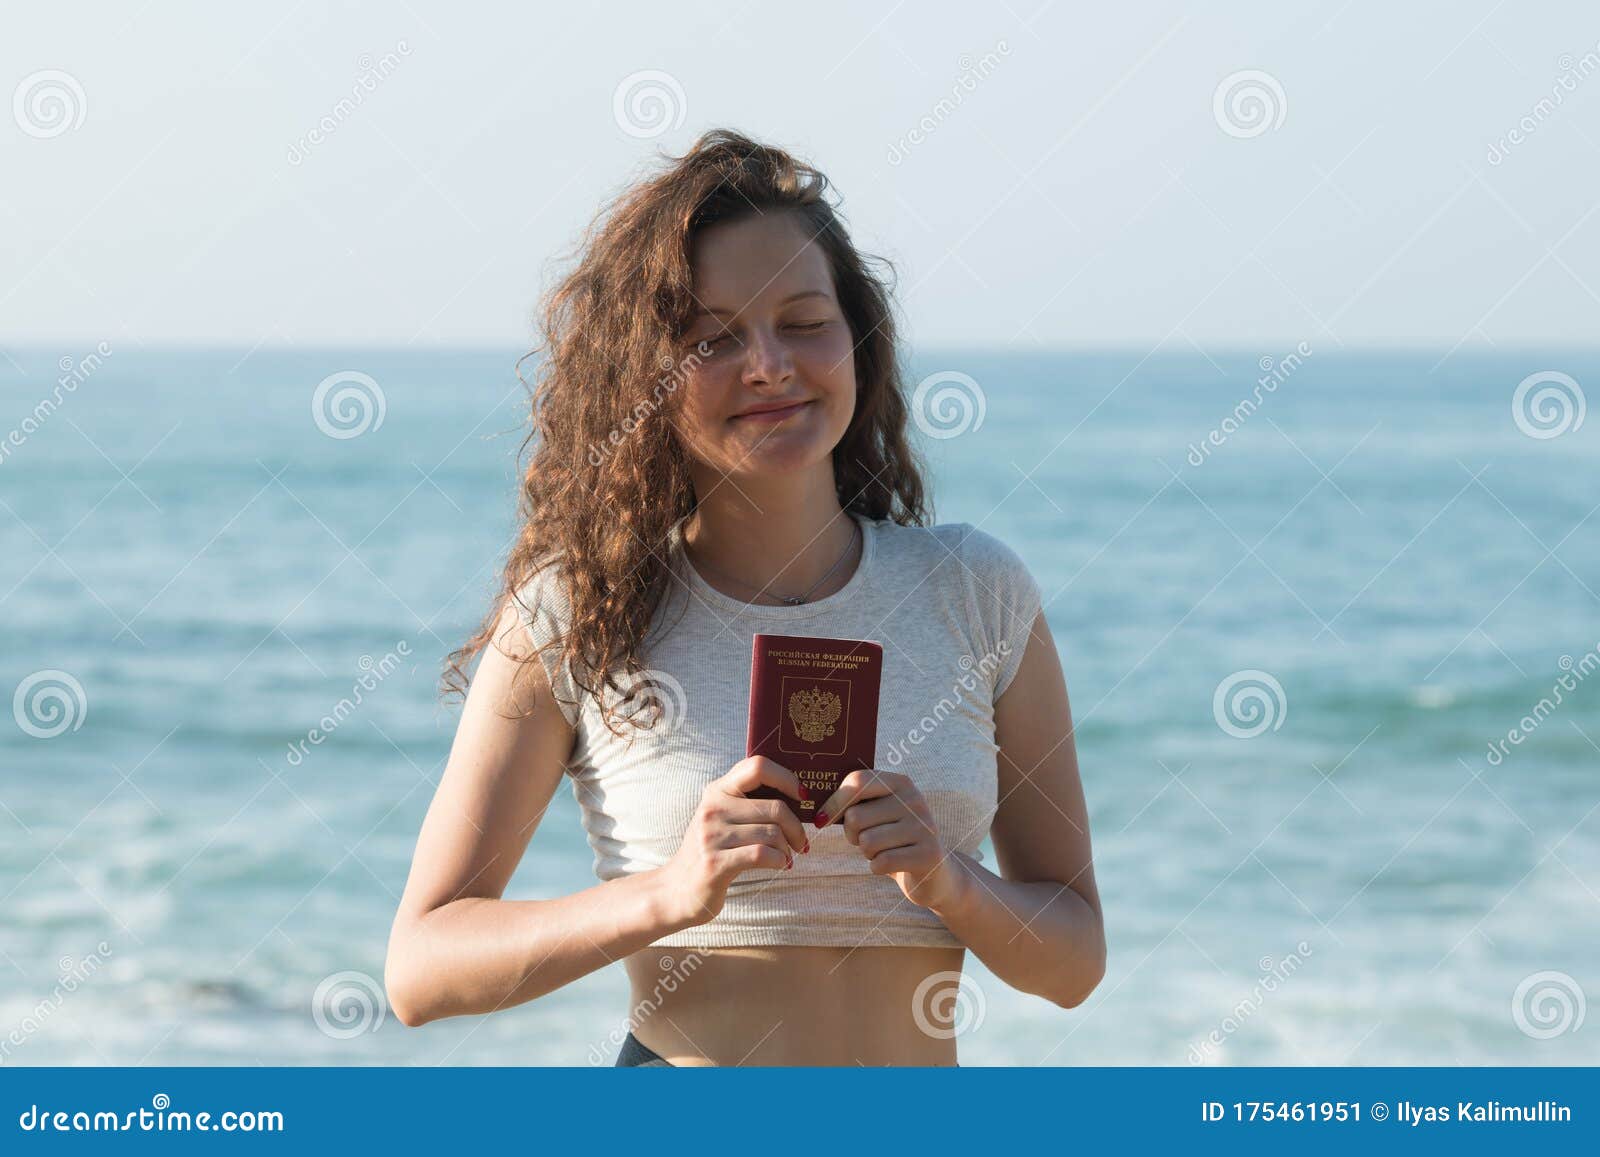 Dreaming About Vacations Russian Girl Holding Russian Passport Enjoying Vacation Against Sea